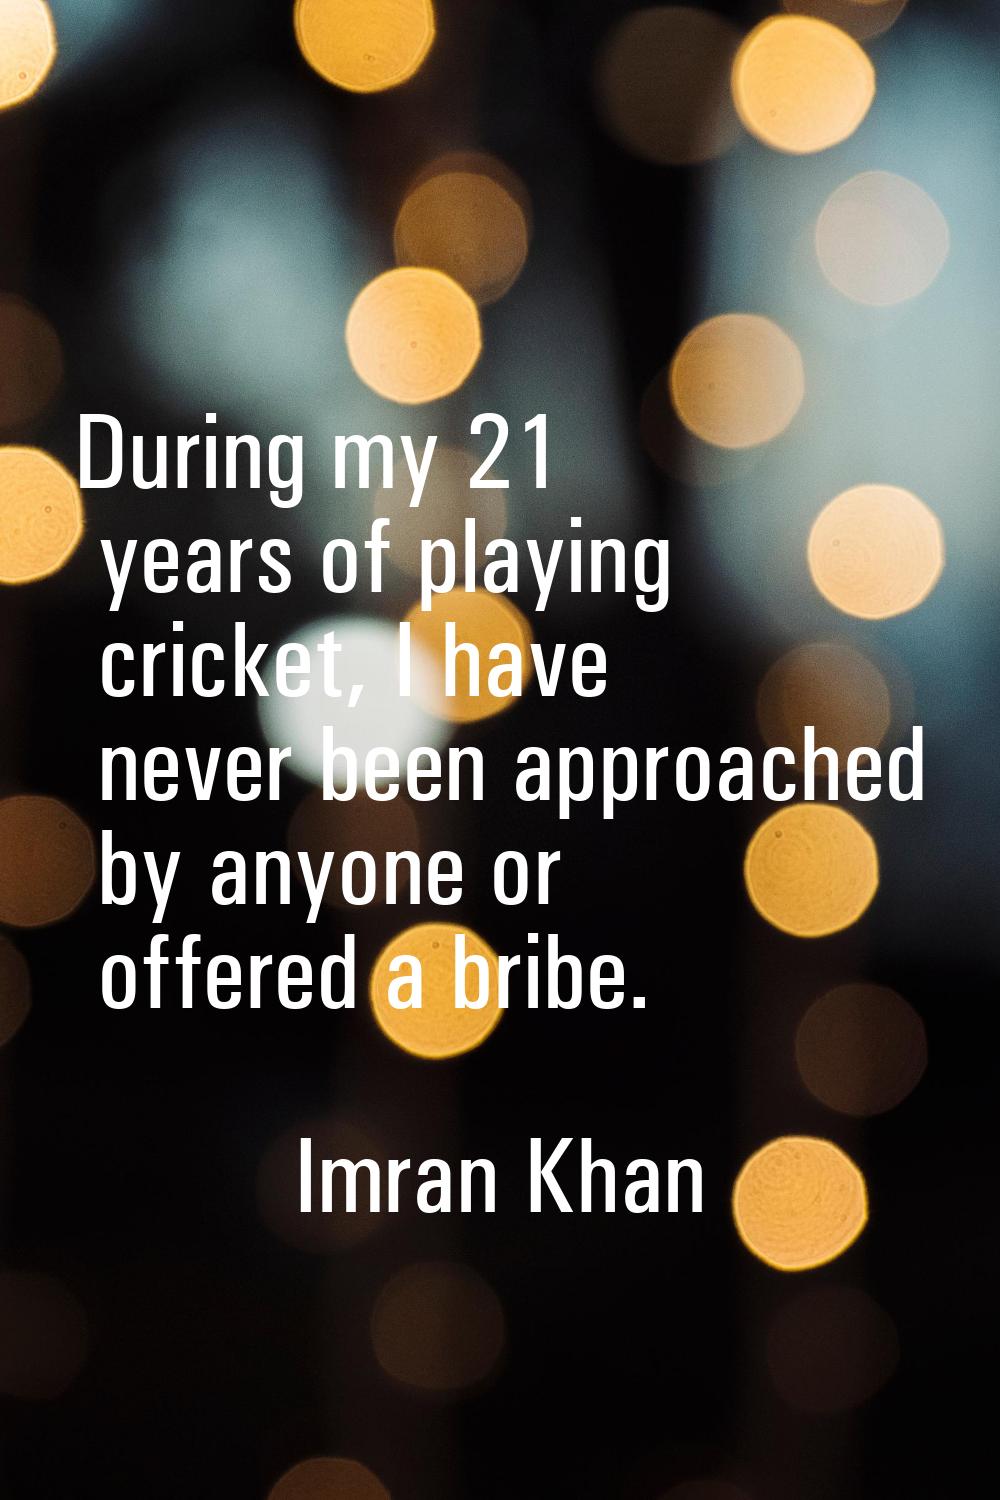 During my 21 years of playing cricket, I have never been approached by anyone or offered a bribe.